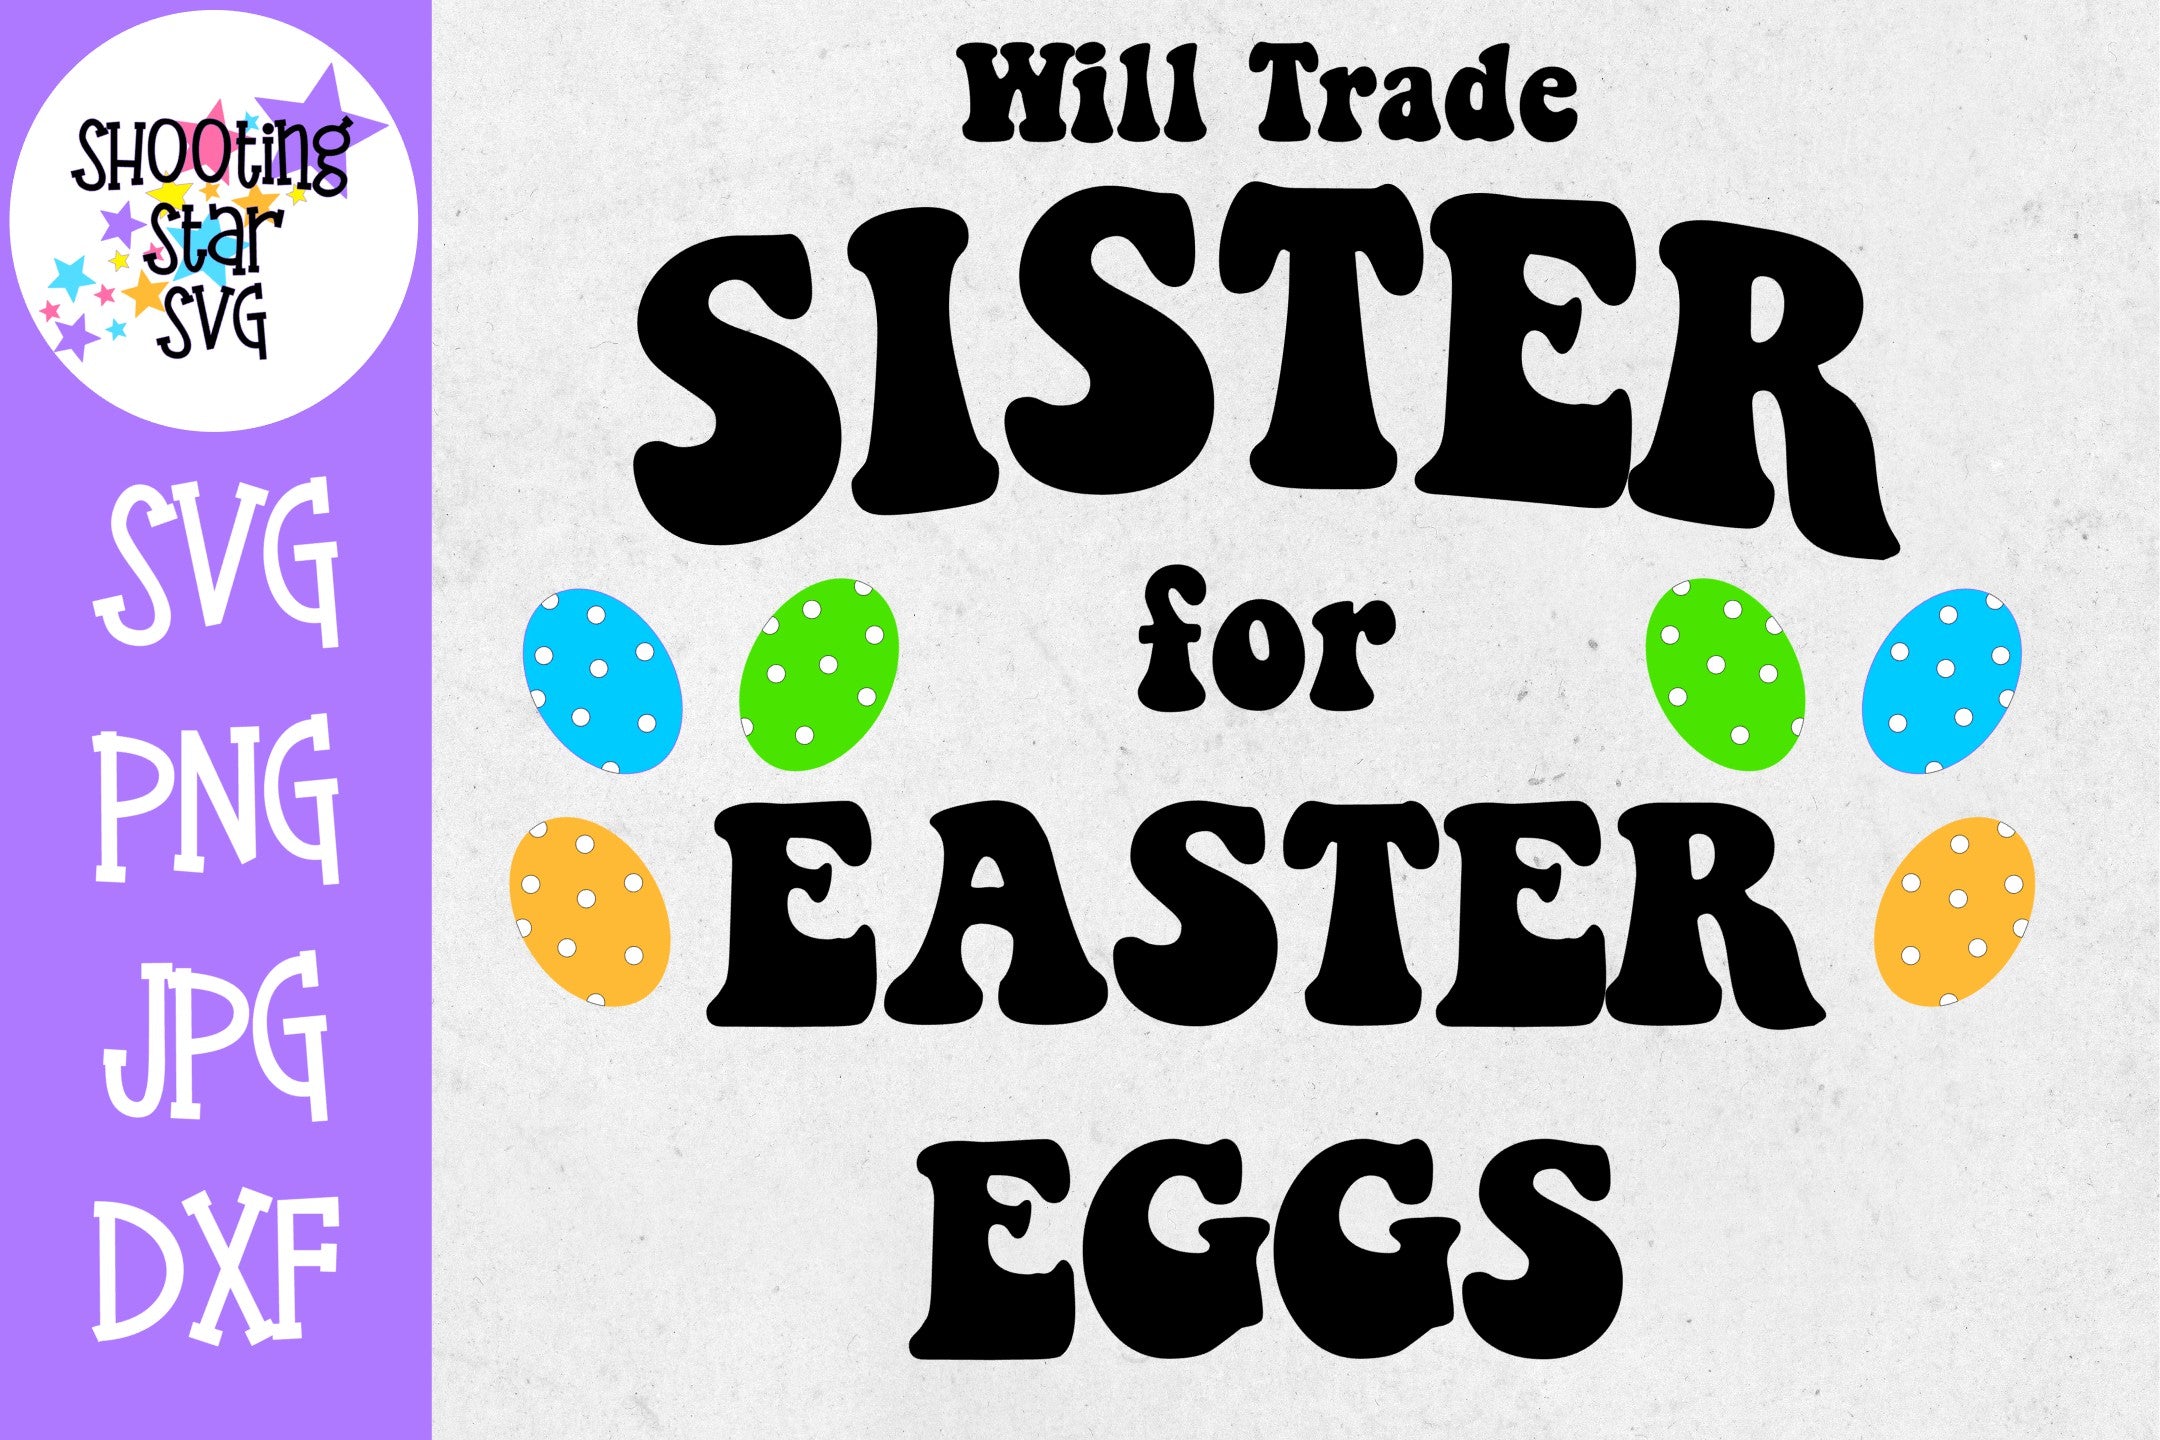 Will trade sister for easter eggs - Easter SVG - Bundle